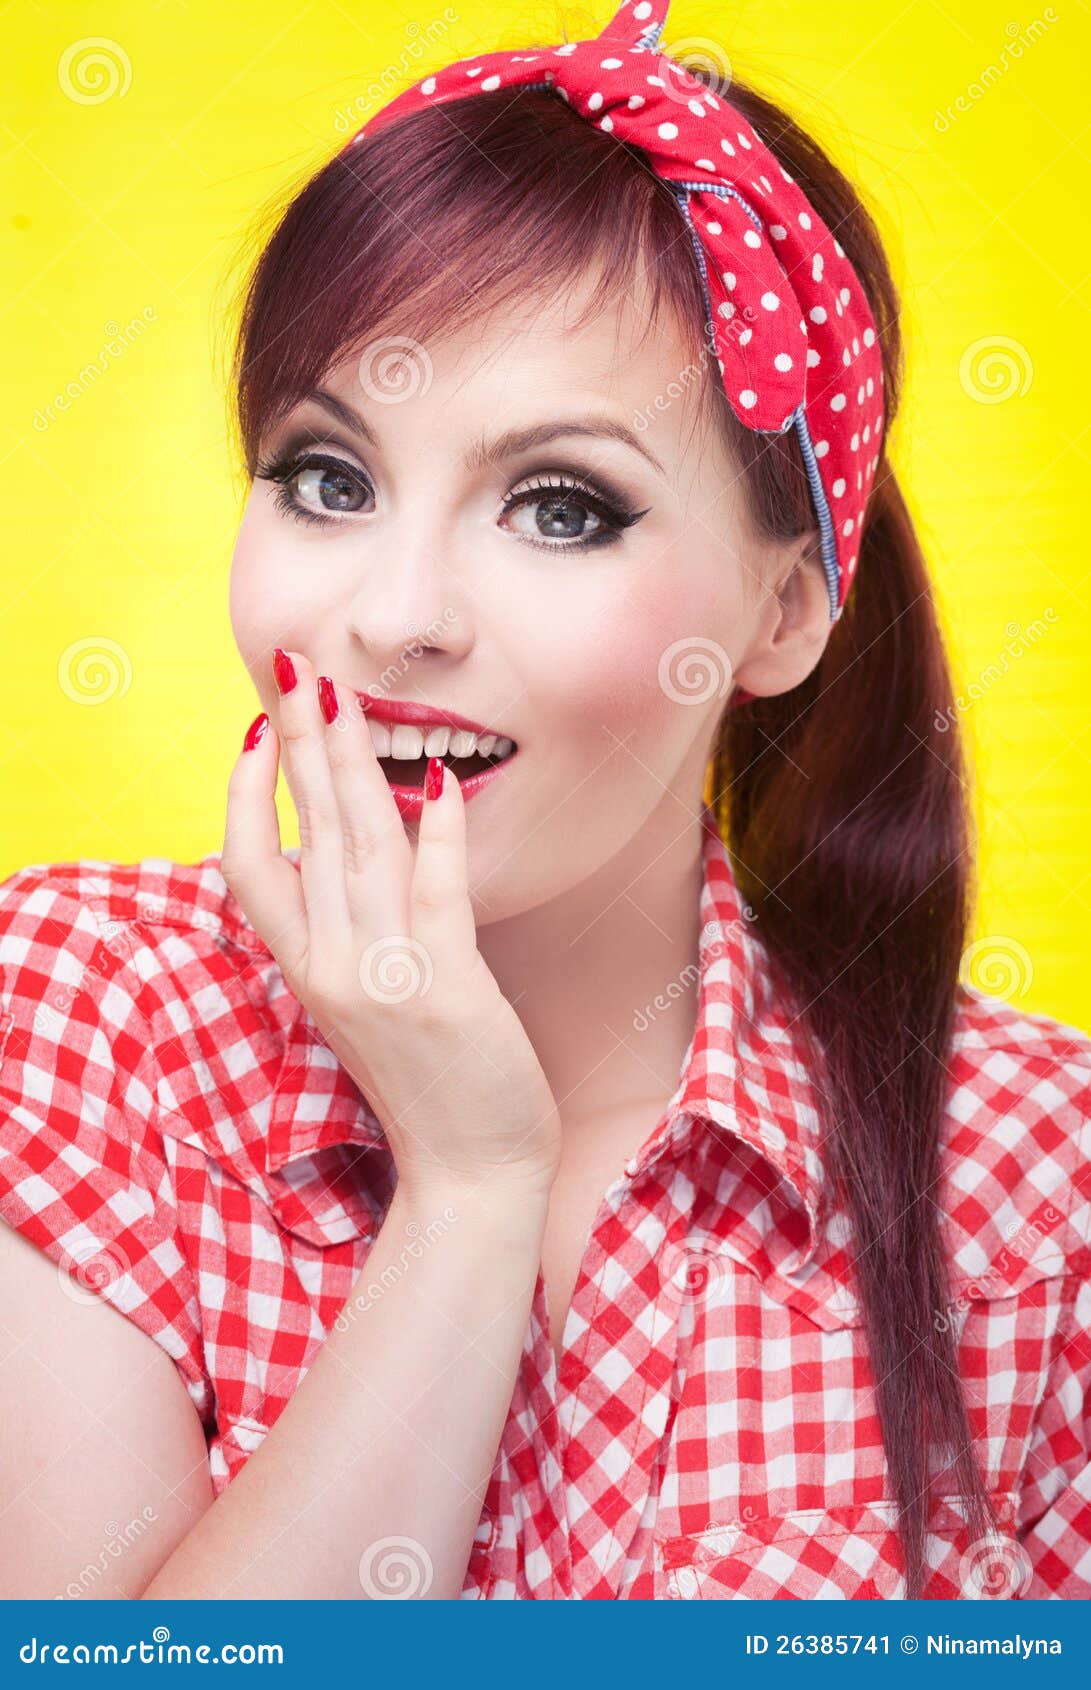 Surprised Pin Up Girl Retro Style Portrait Stock Image